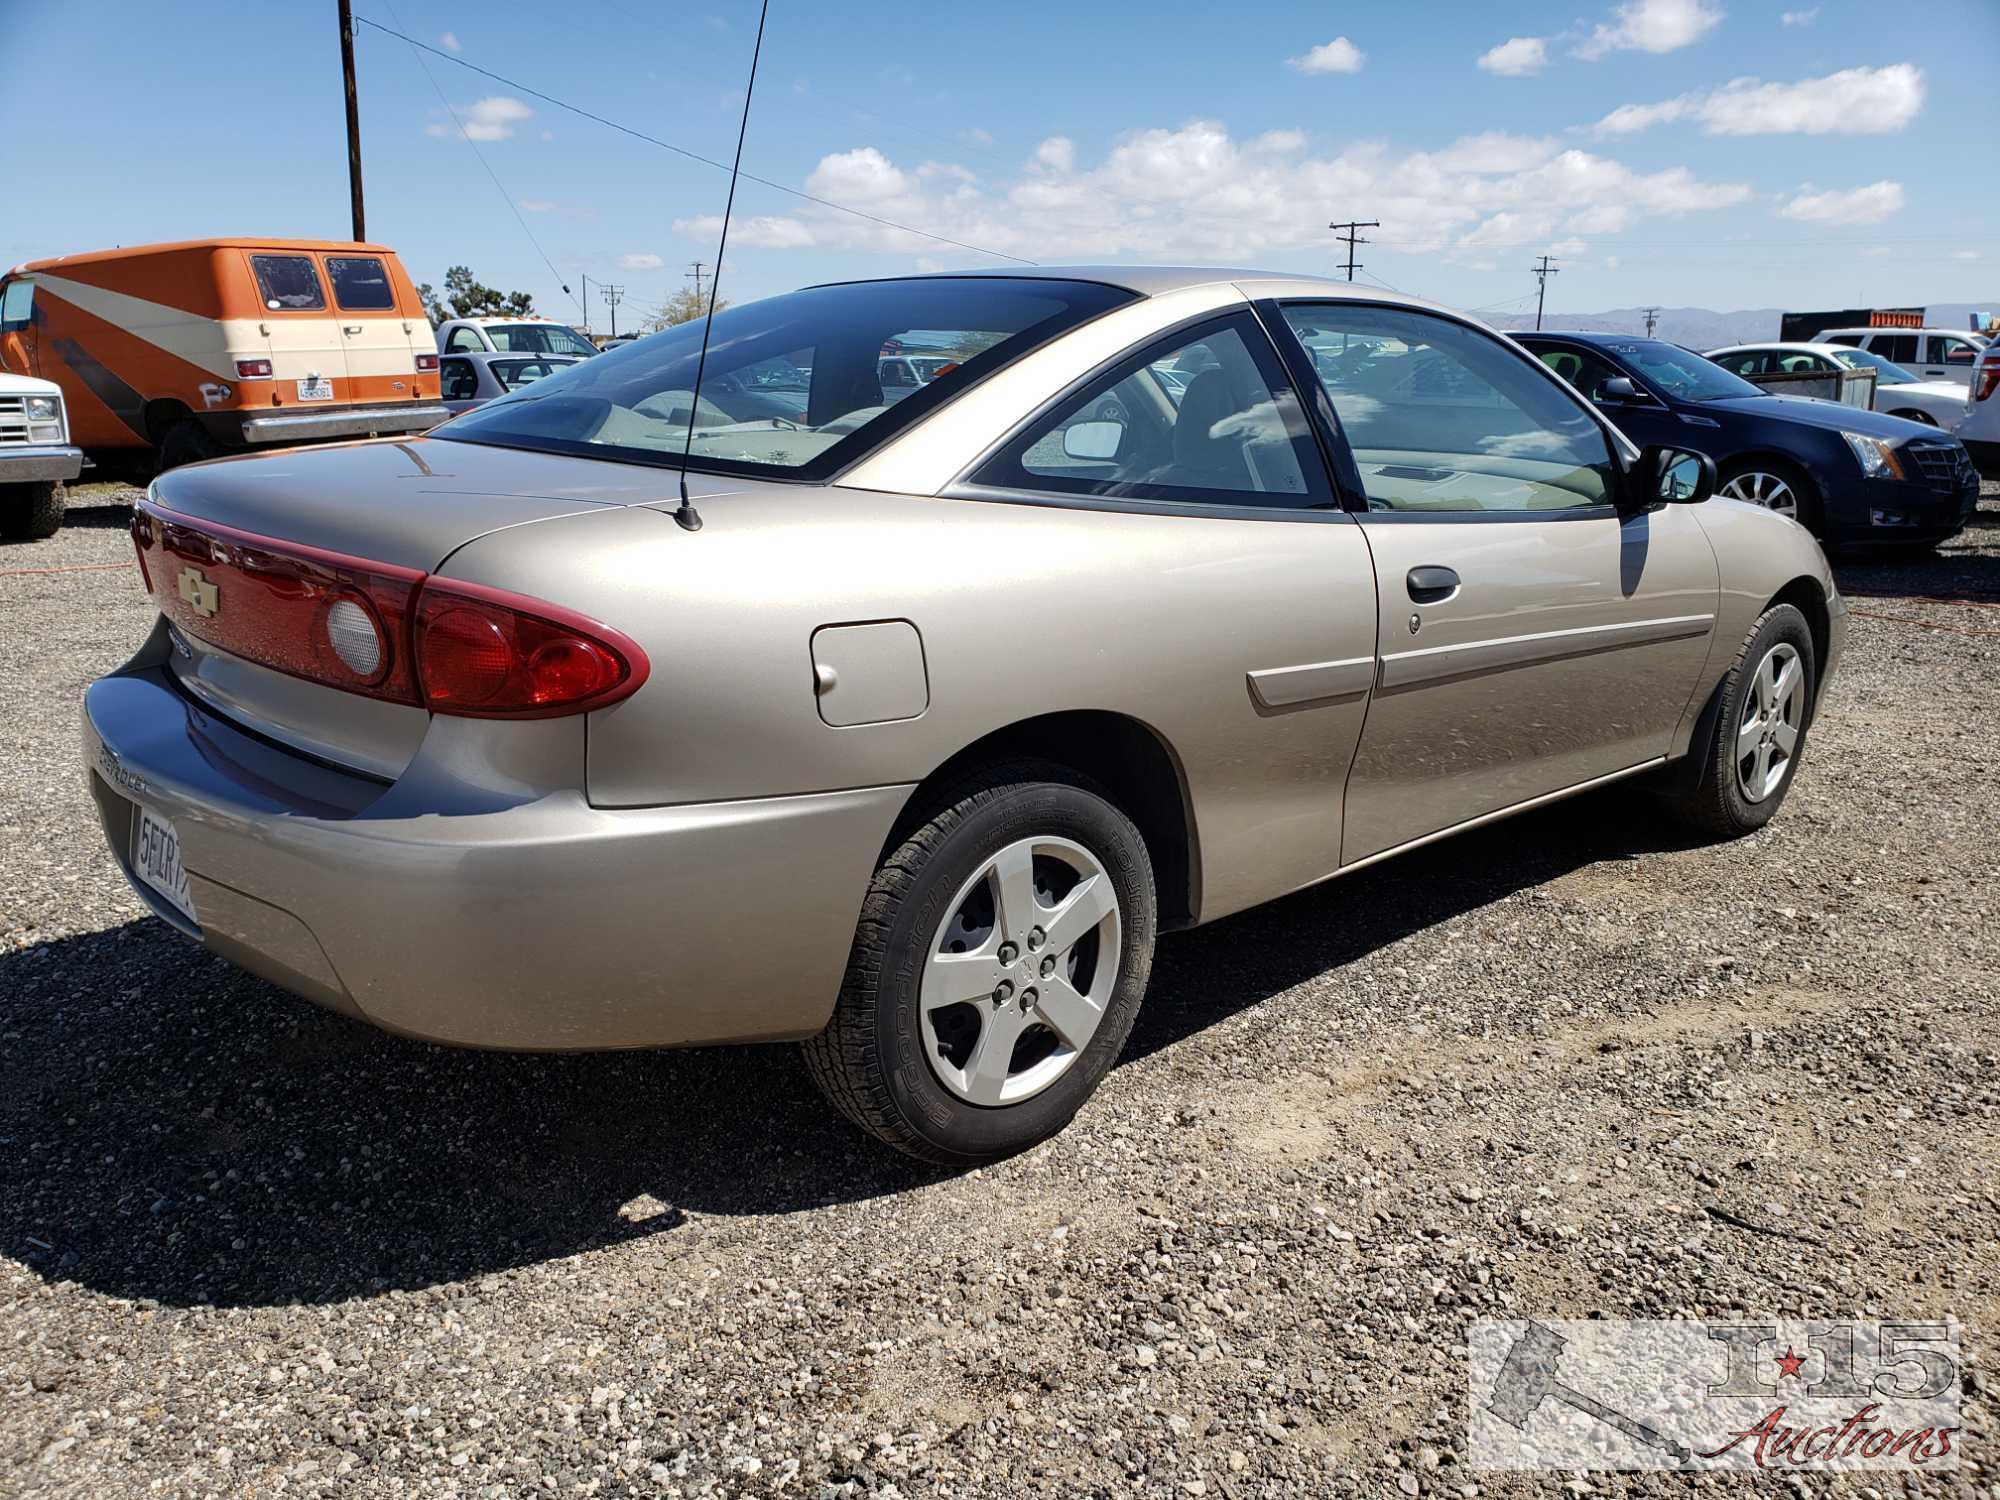 2004 Chevrolet Cavalier, See Video! CURRENT SMOG, Ice COLD Air